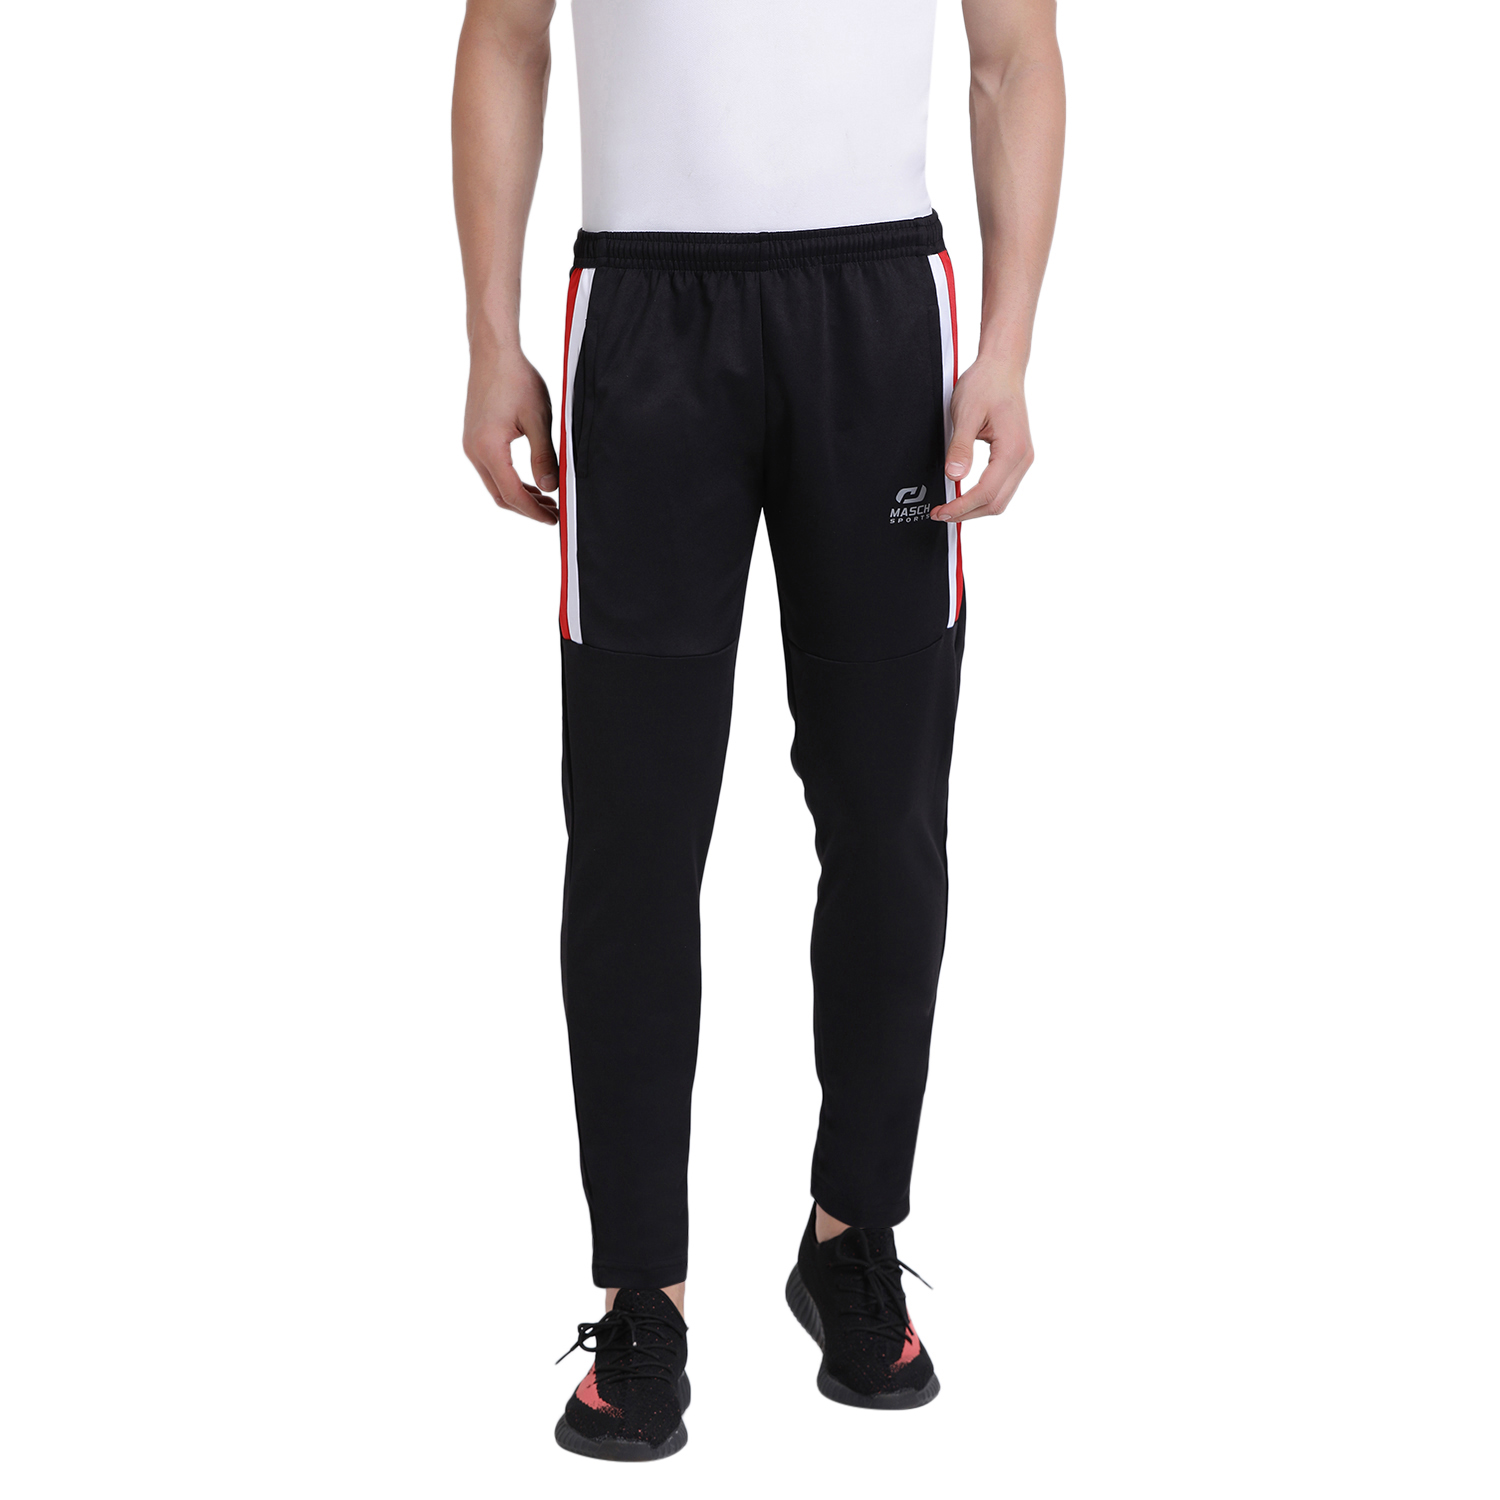 Buy Masch Sports Men's Active Wear Regular-fit Lower with Elastic ...